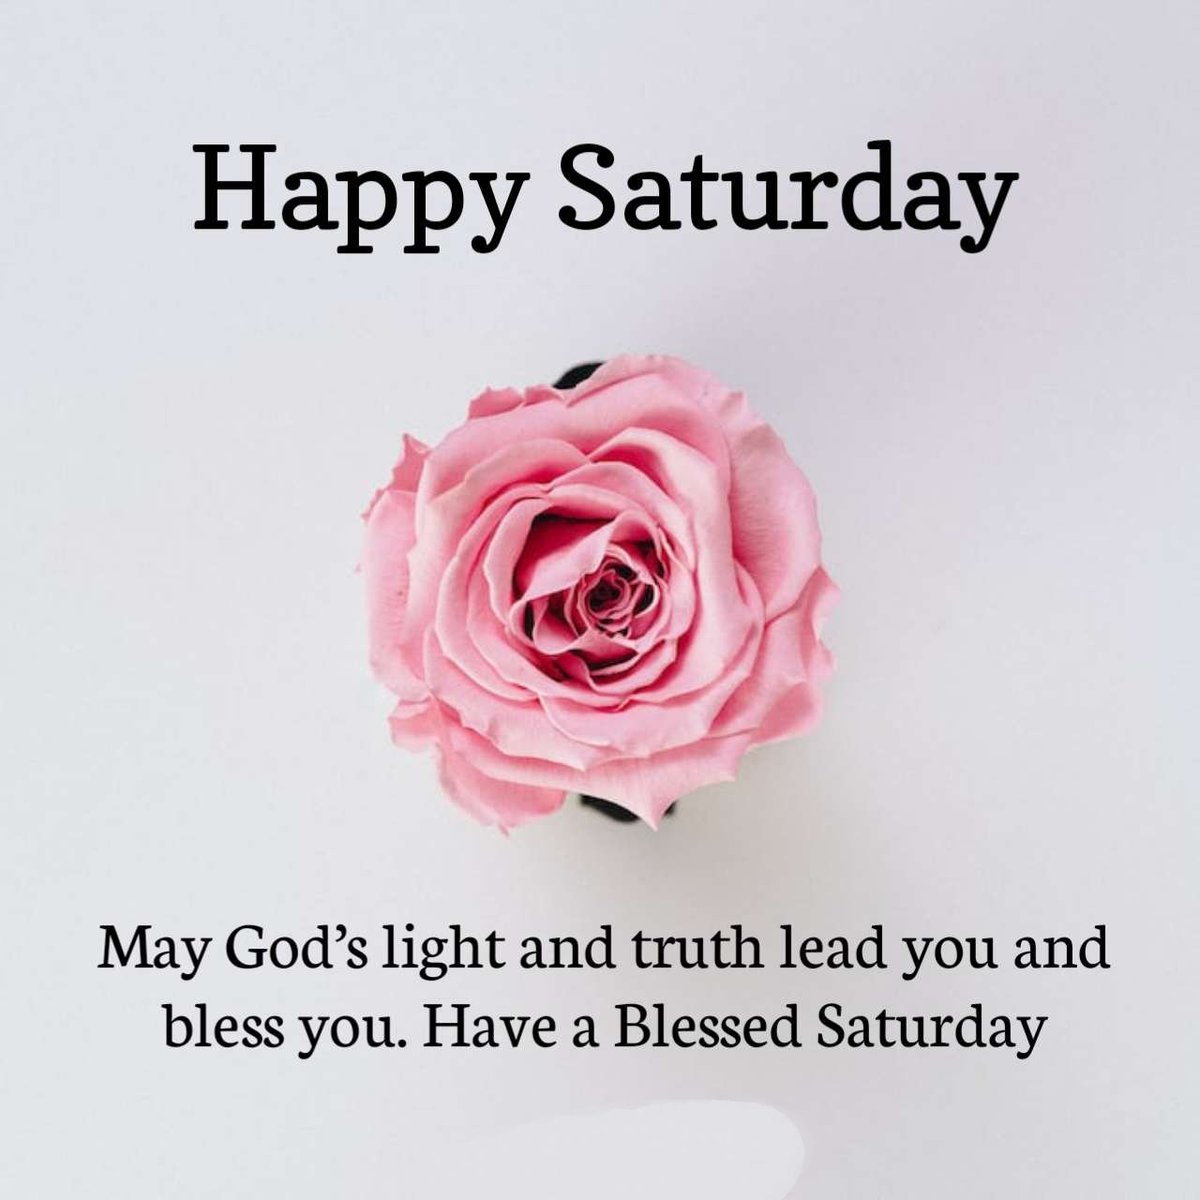 Good Morning 🌷 Happy Saturday 🏖️ May God's Light and truth lead you and bless you 💫